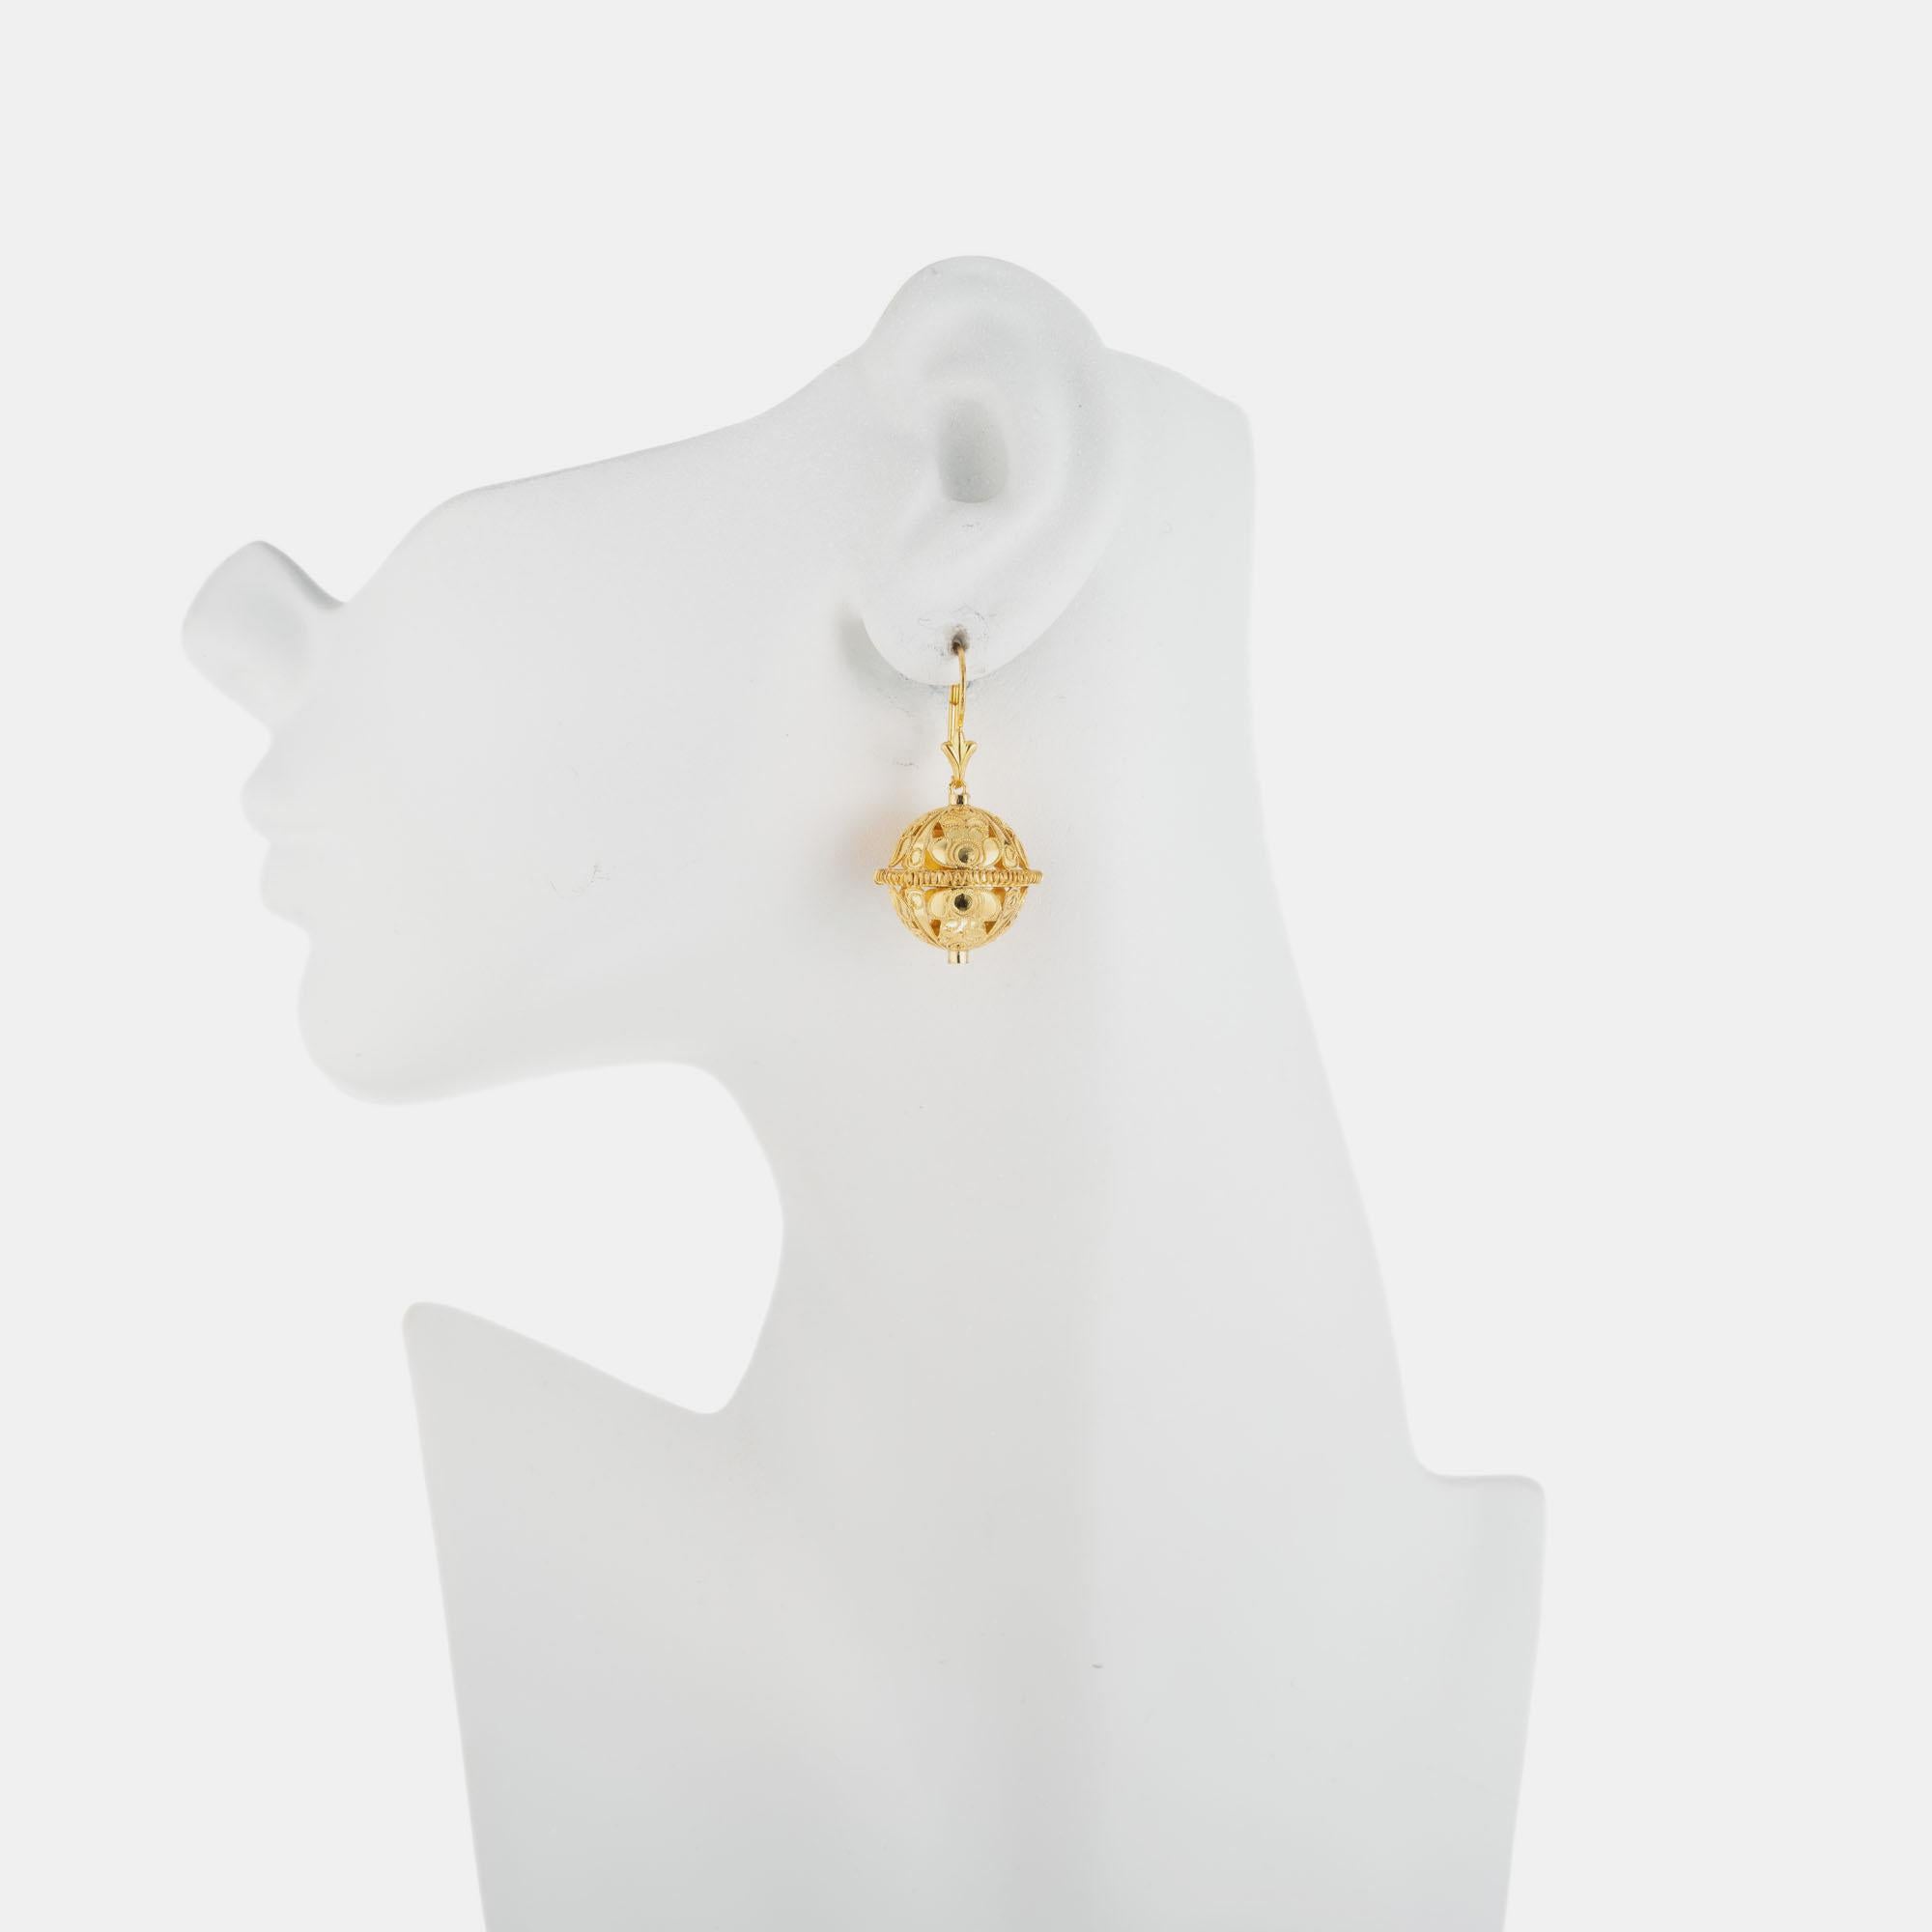 Open Work Yellow Gold Ball Dangle Earrings In Excellent Condition For Sale In Stamford, CT